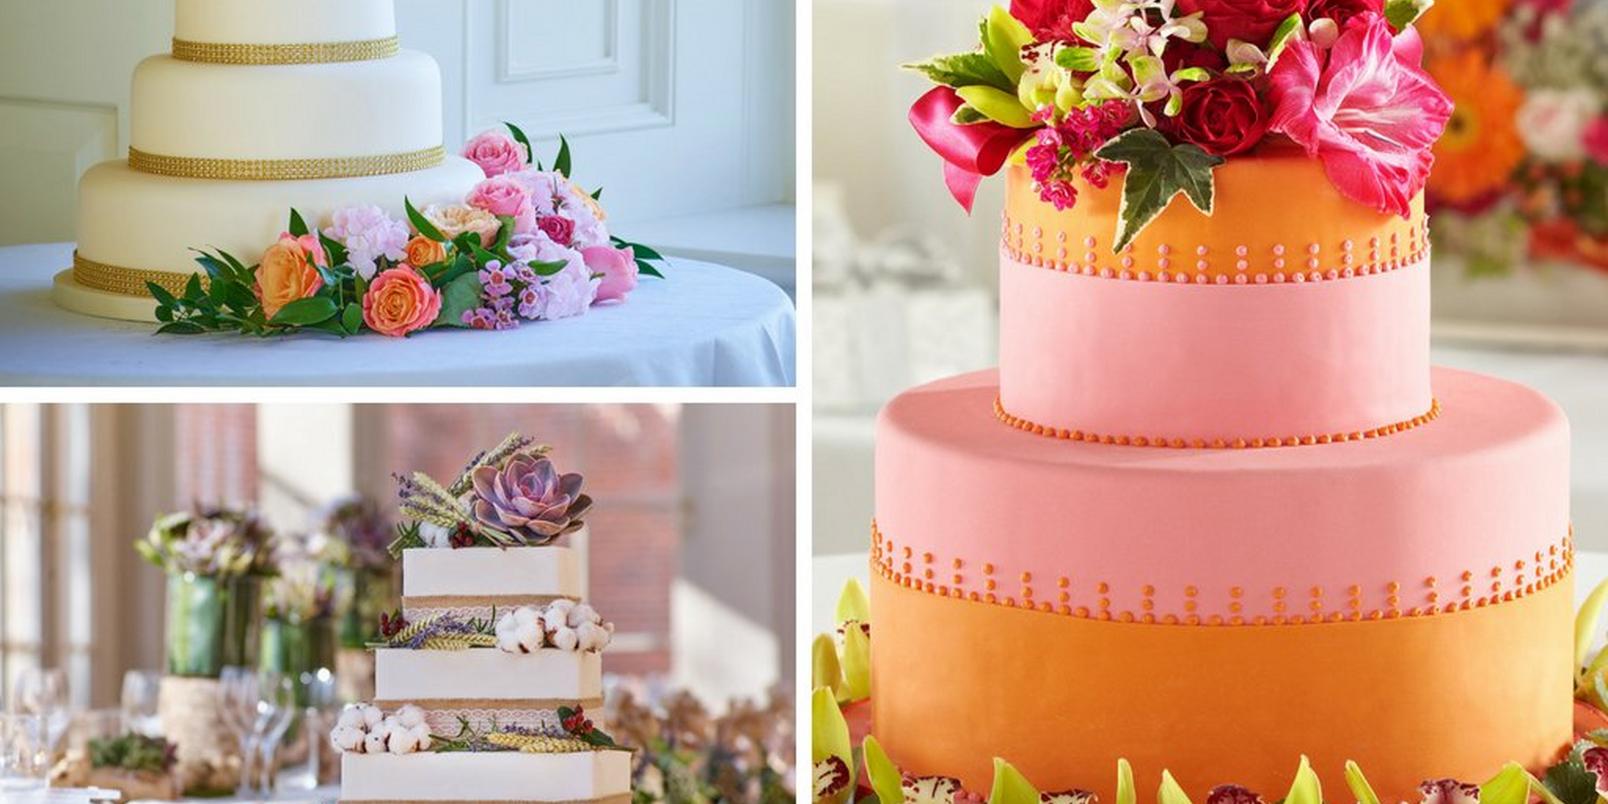 floral-decorations-wedding-cakes